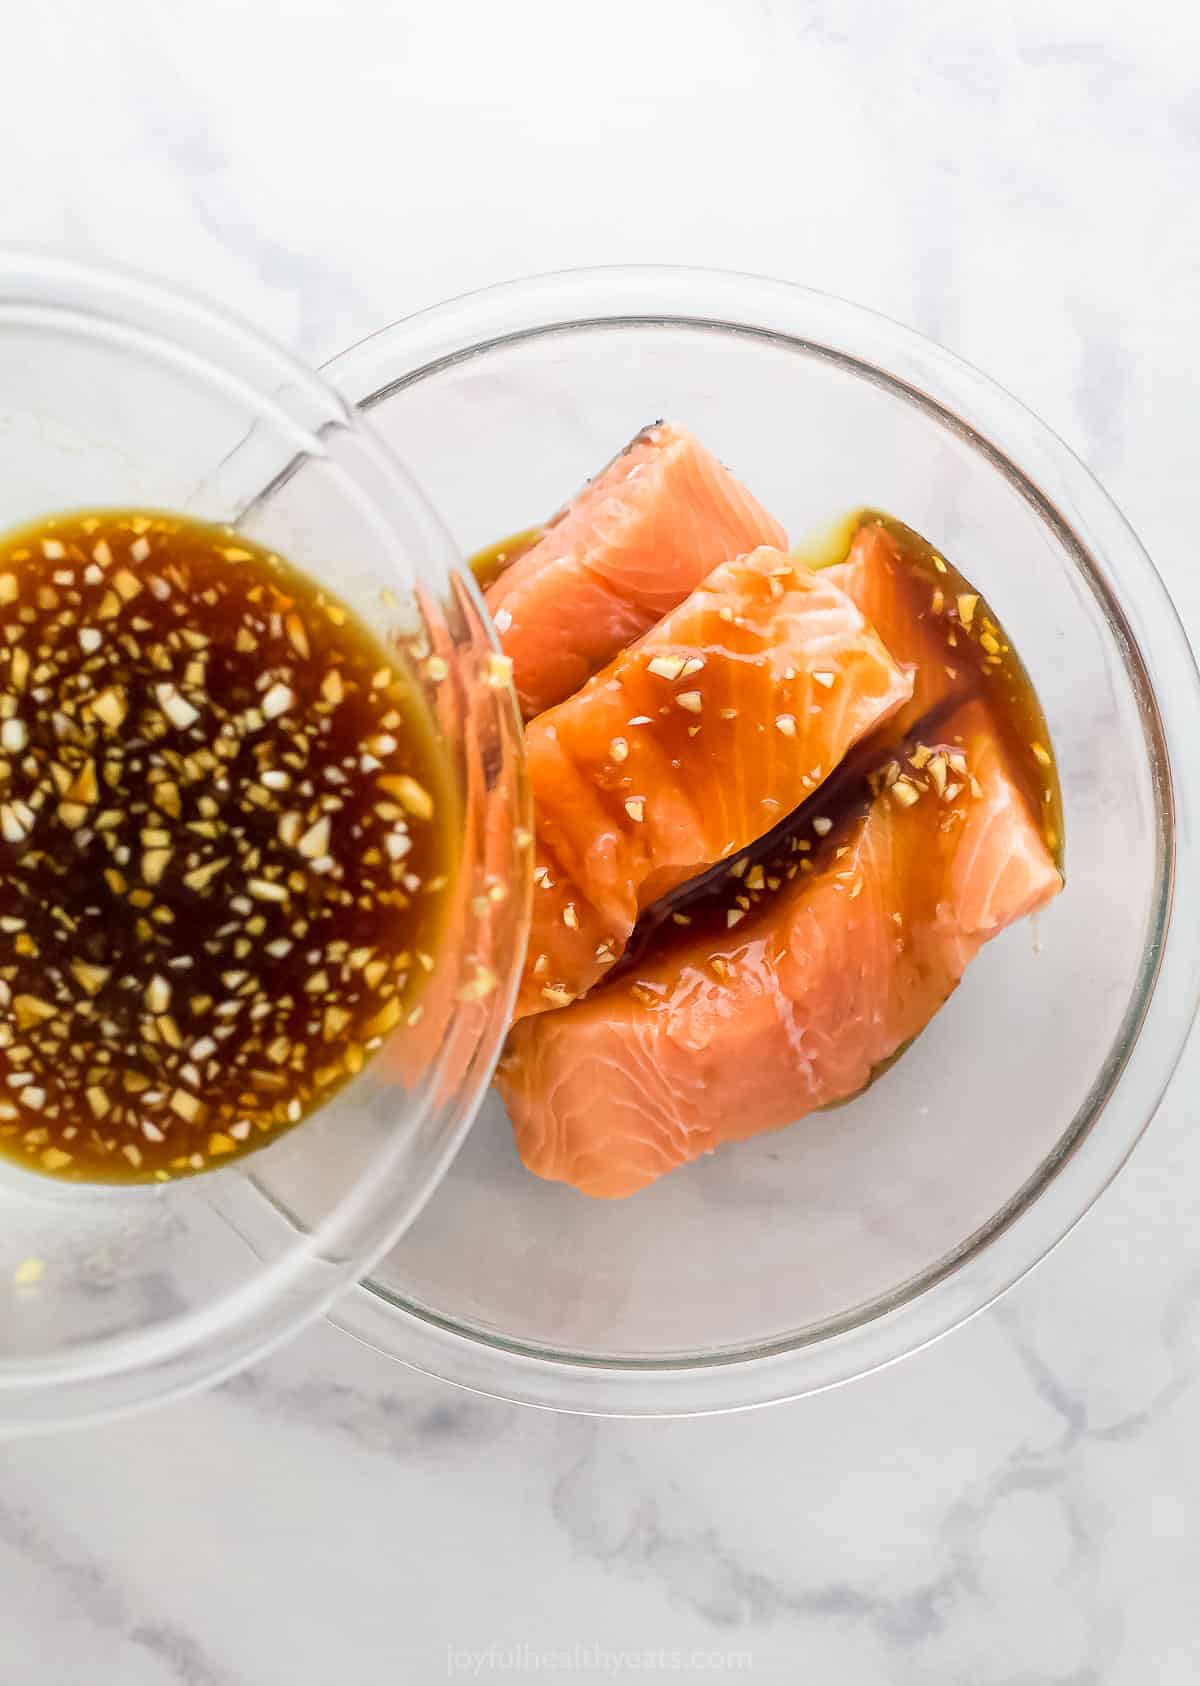 Pouring the marinade over the fresh salmon in a bowl. 